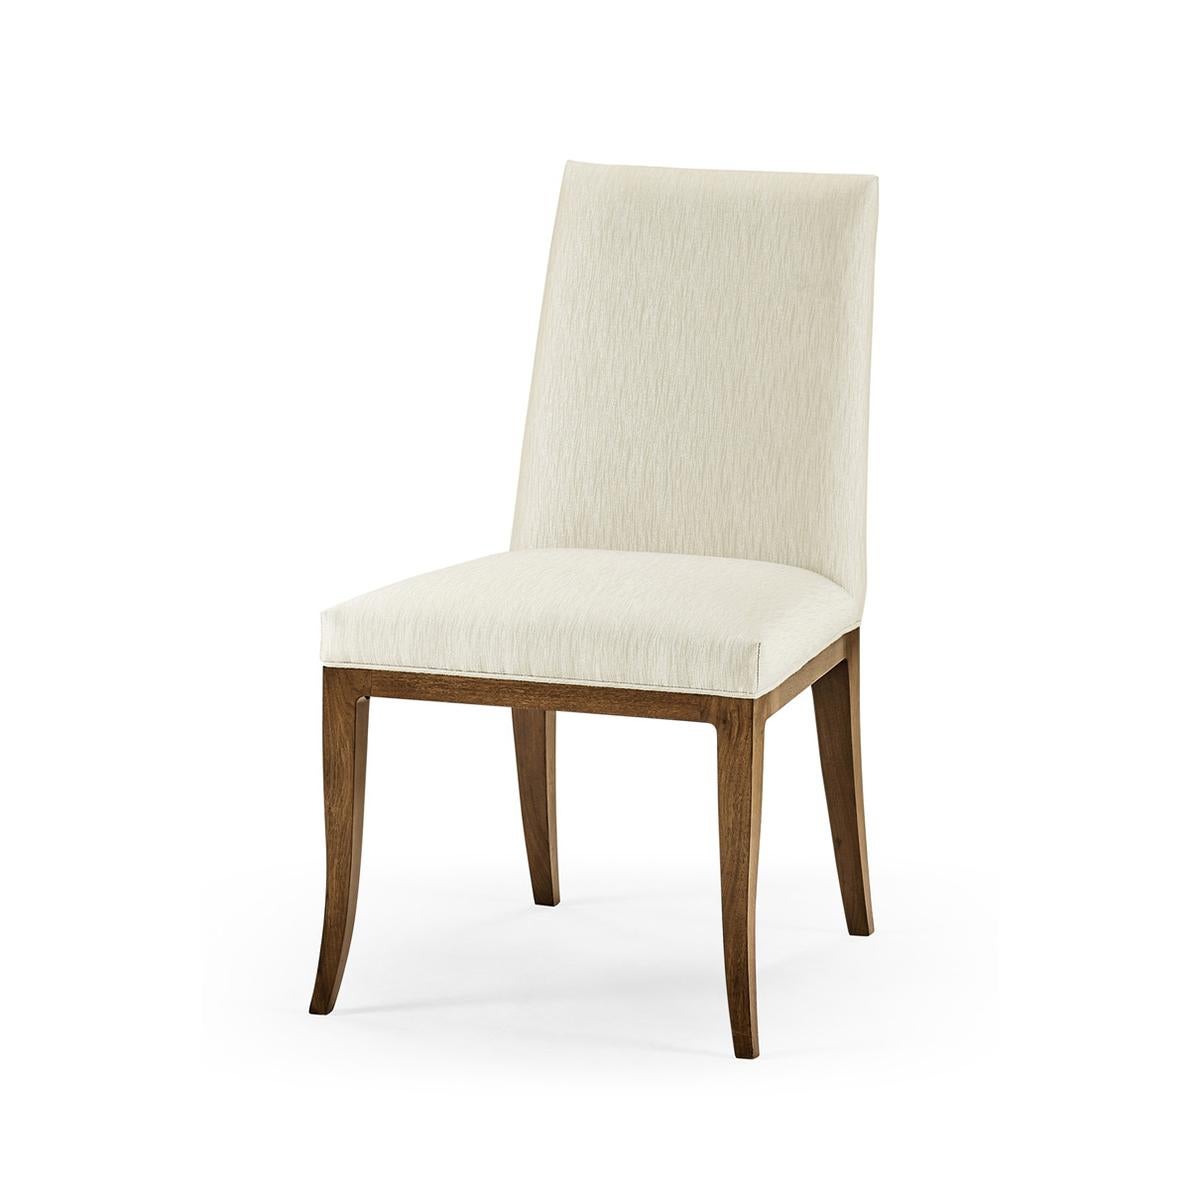 Contemporary Mid Century Modern Dining Chair For Sale